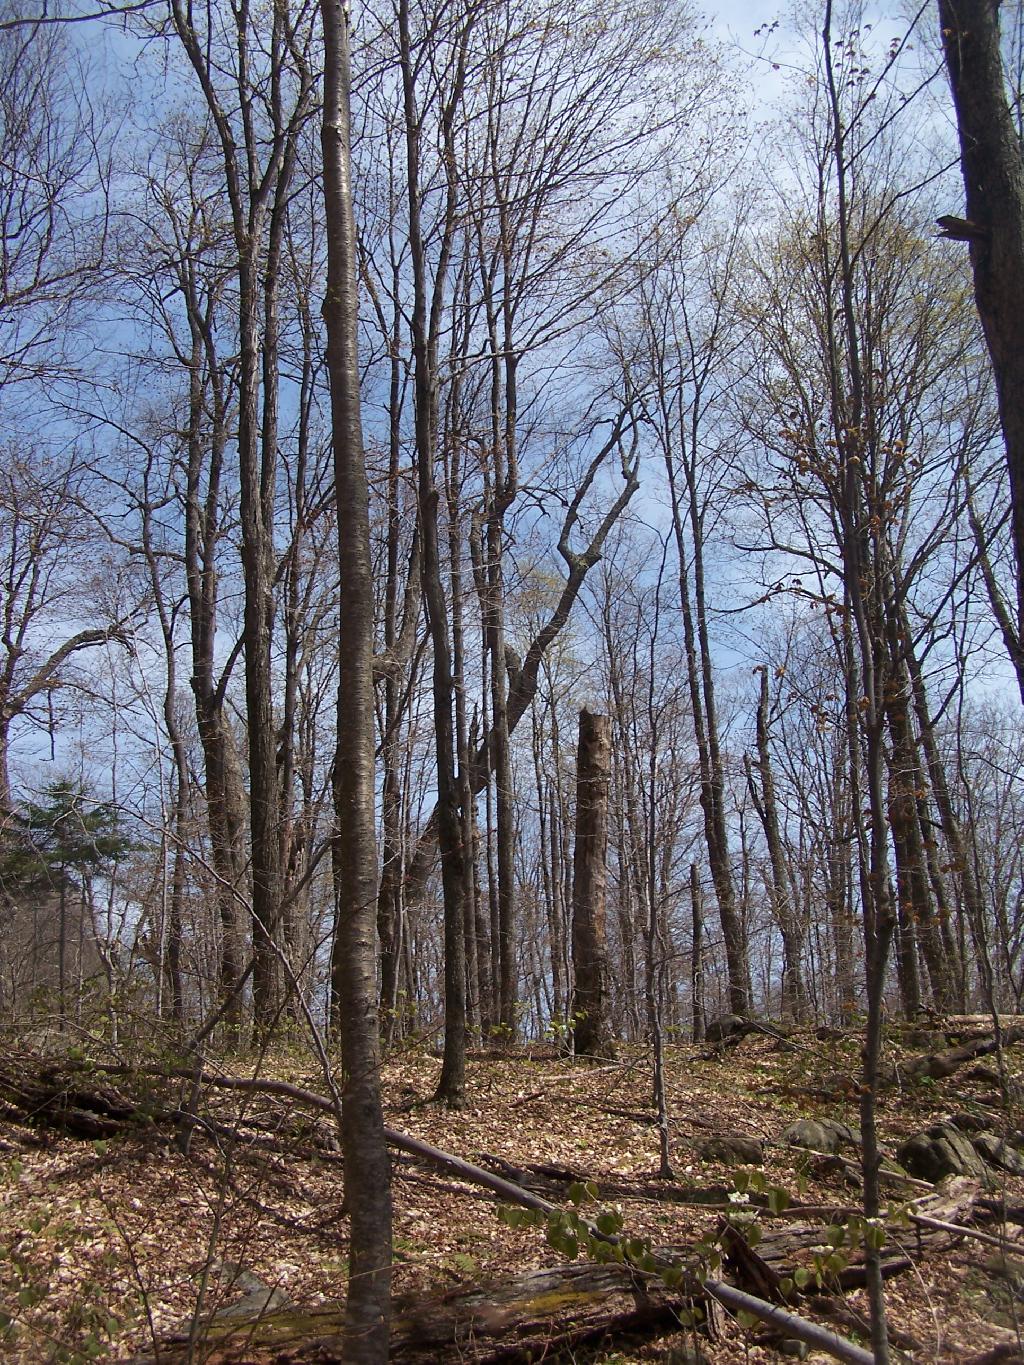 a wooded area with many thin trees in the foreground